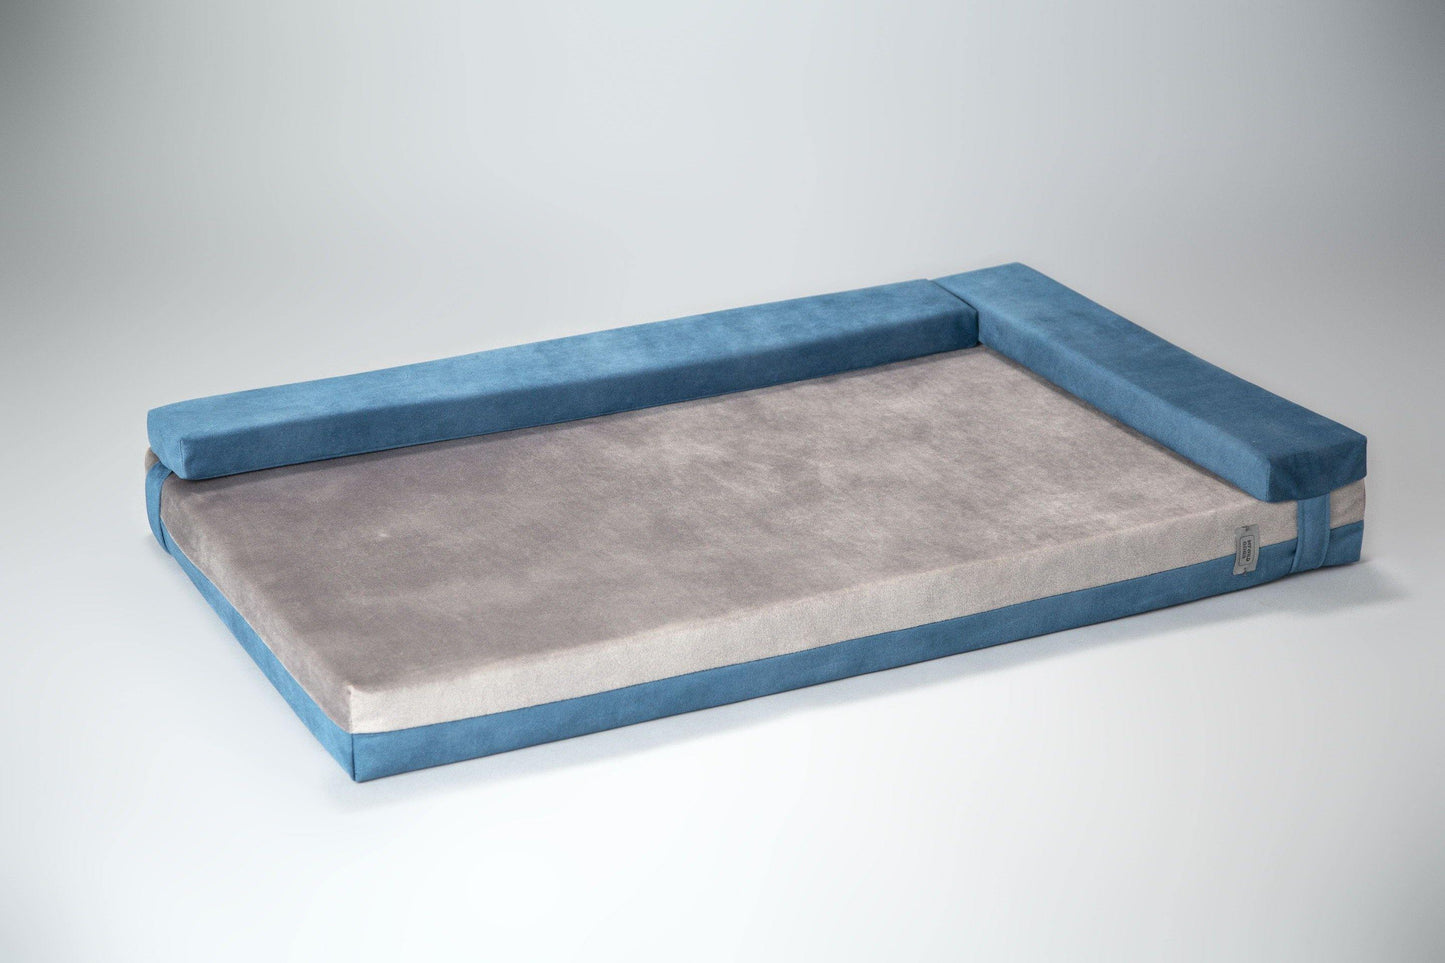 Transformer dog bed | Extra comfort & support | 2-sided | SAPPHIRE BLUE+FOG GREY - premium dog goods handmade in Europe by My Wild Other